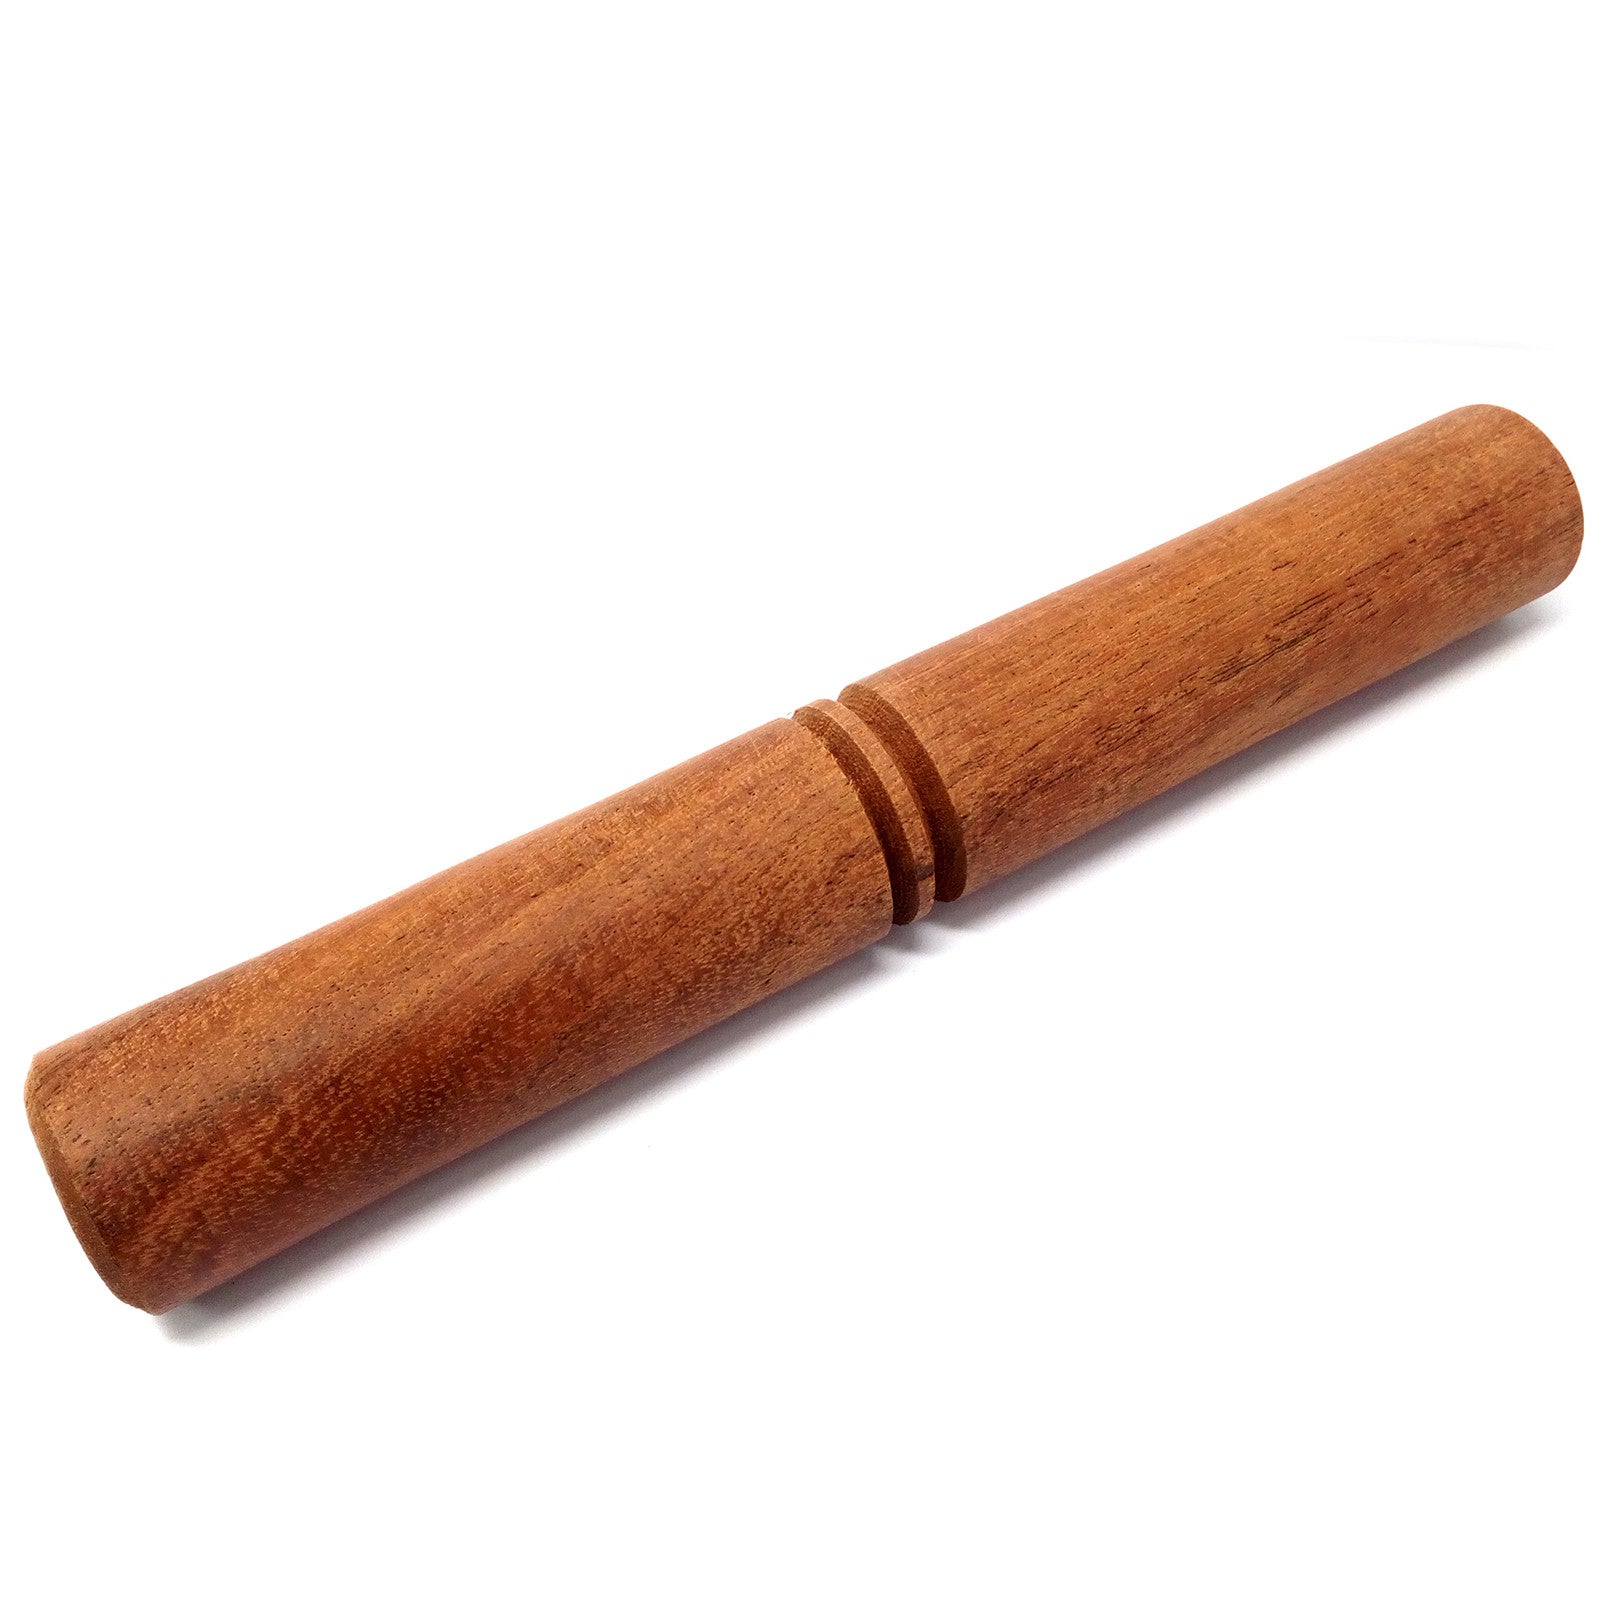 View Wooden Small Stick Plain information